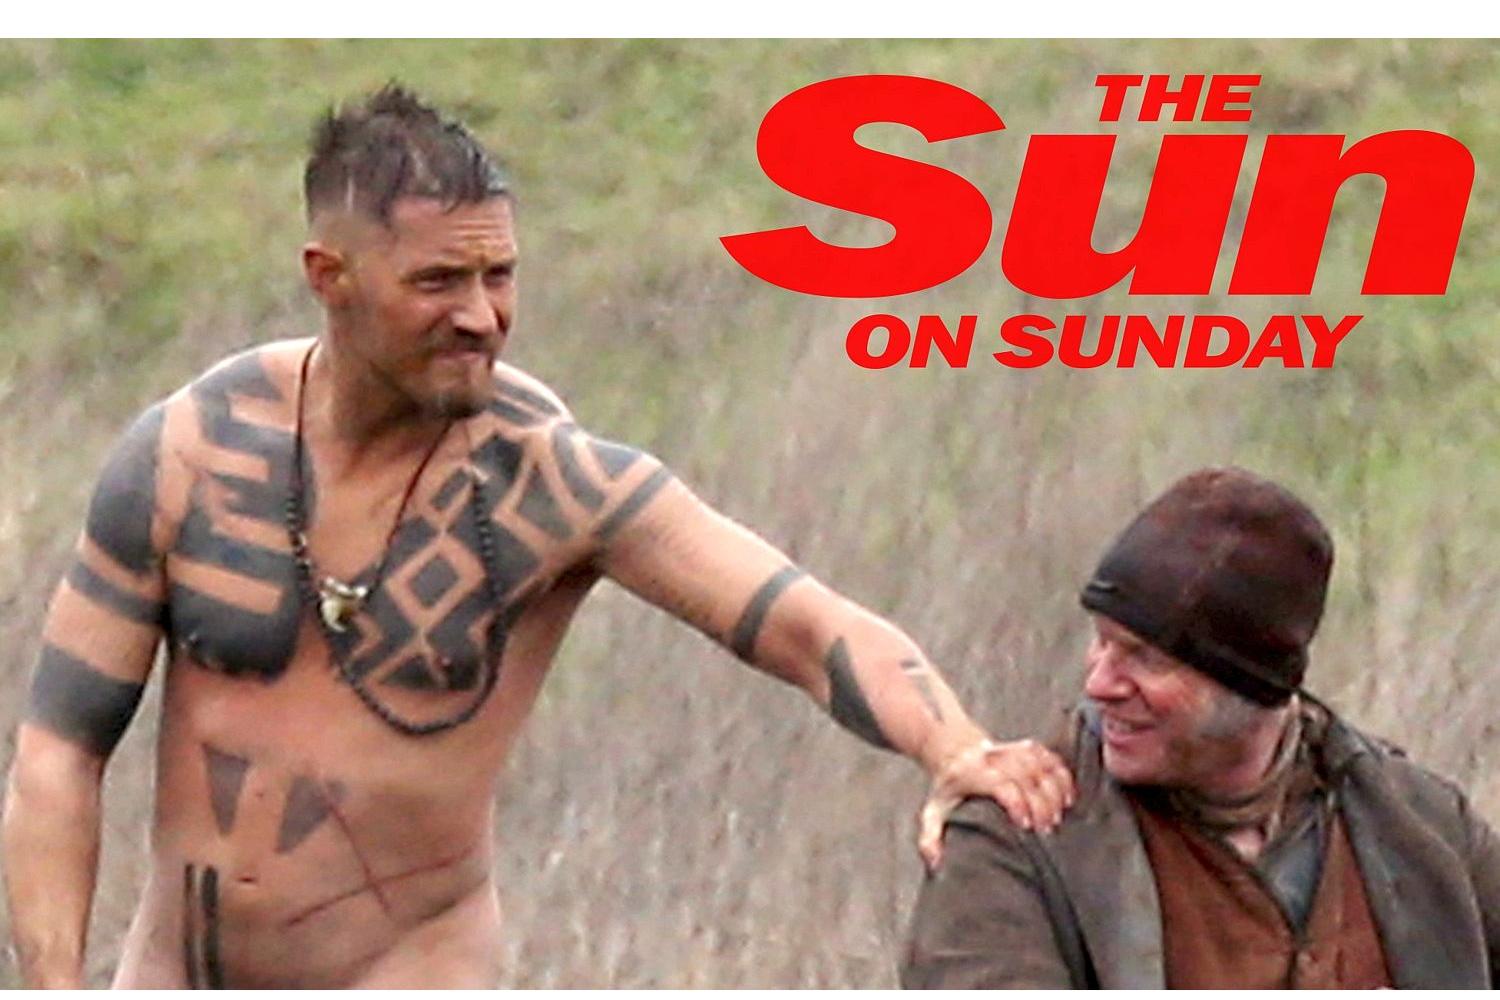 OMG, his butt UHGAIN: Oscar nominated actor Tom Hardy gets naked on set in ...